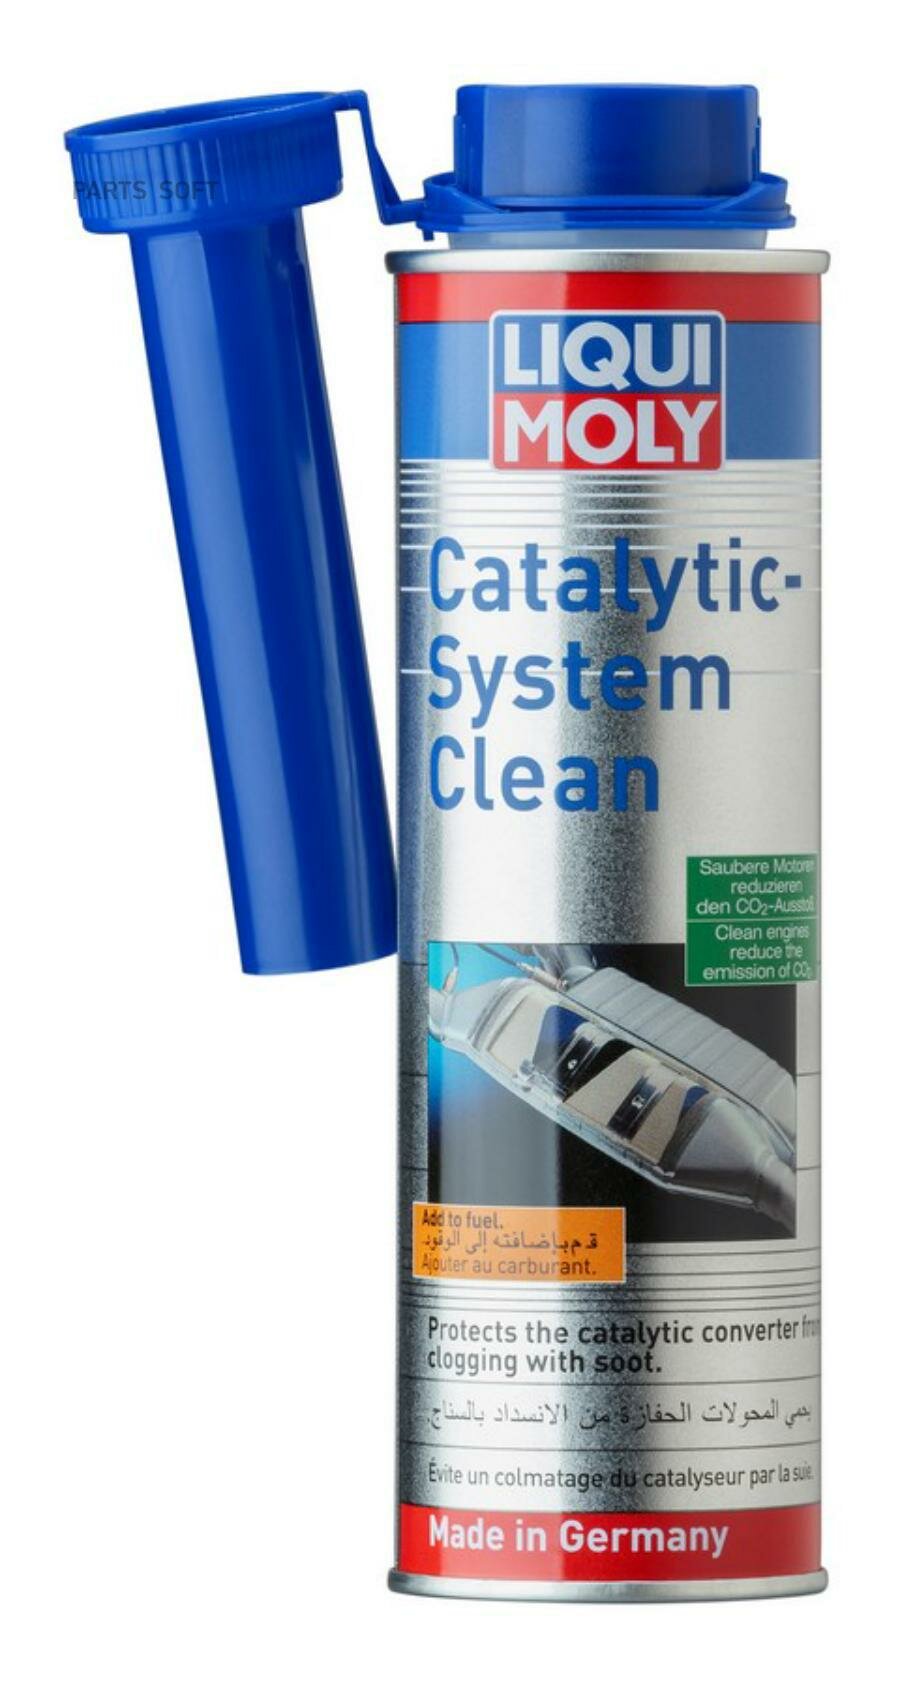 LIQUI MOLY Catalytic-System Clean